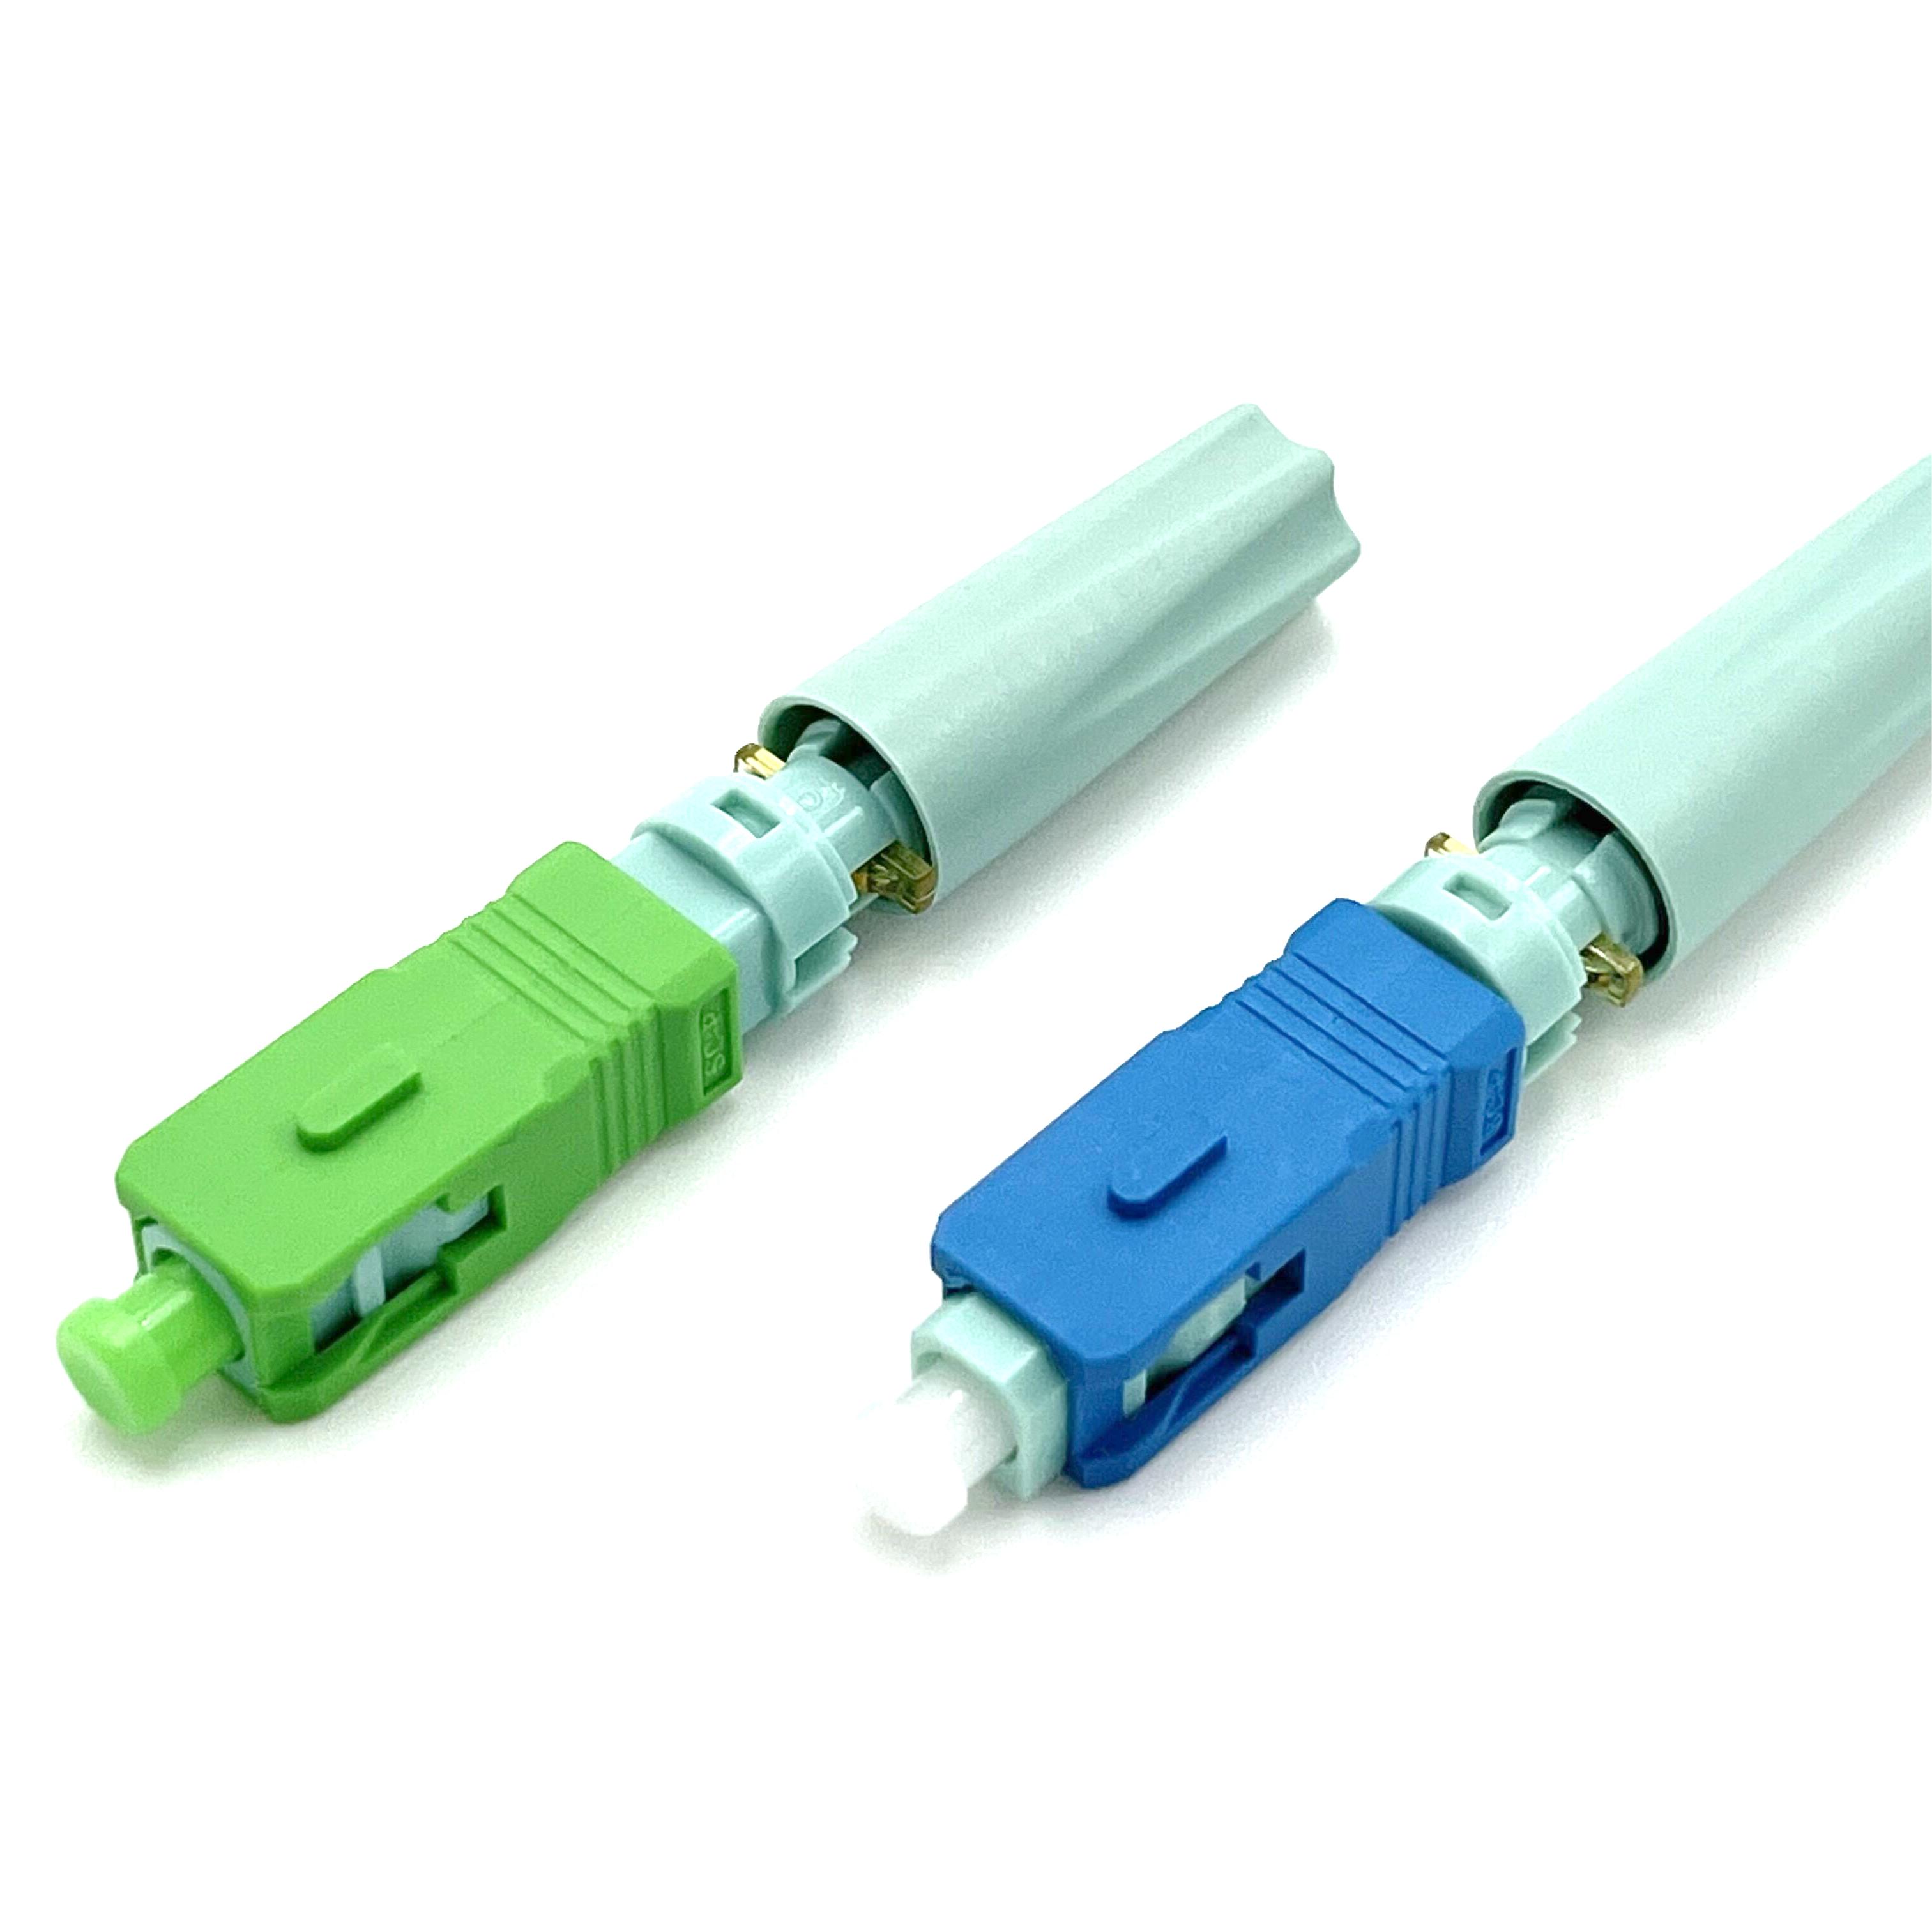 10 JENIS FAST FIELD CONNECTOR